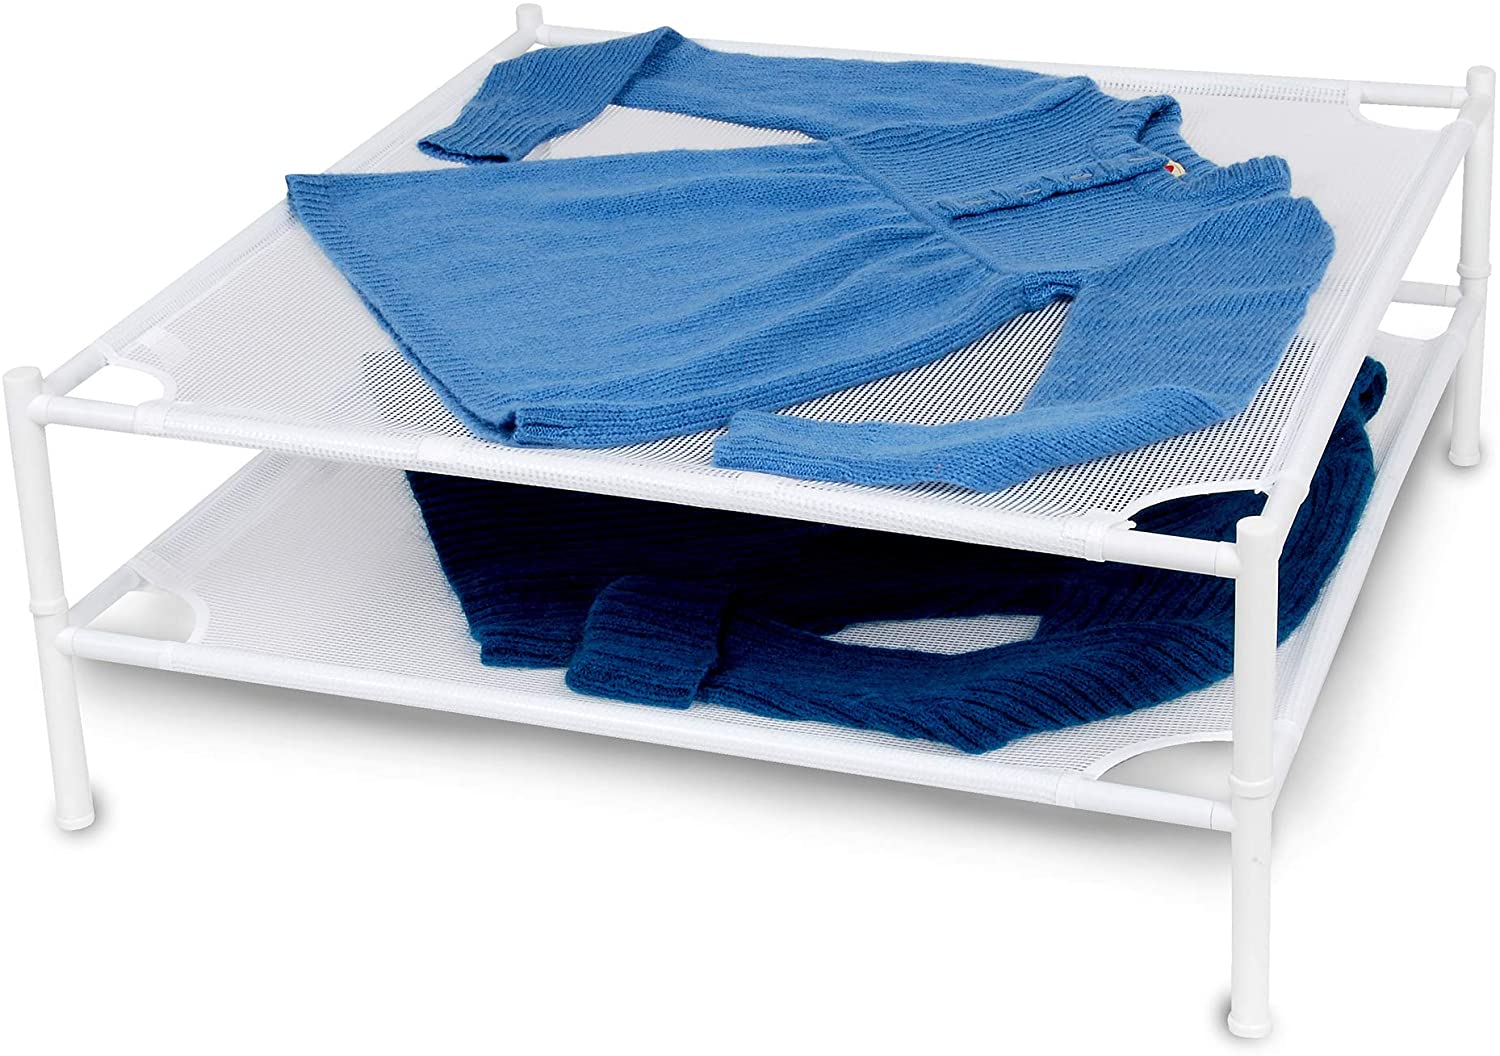 Smart clothes drying rack - Industrial Designers Society of America